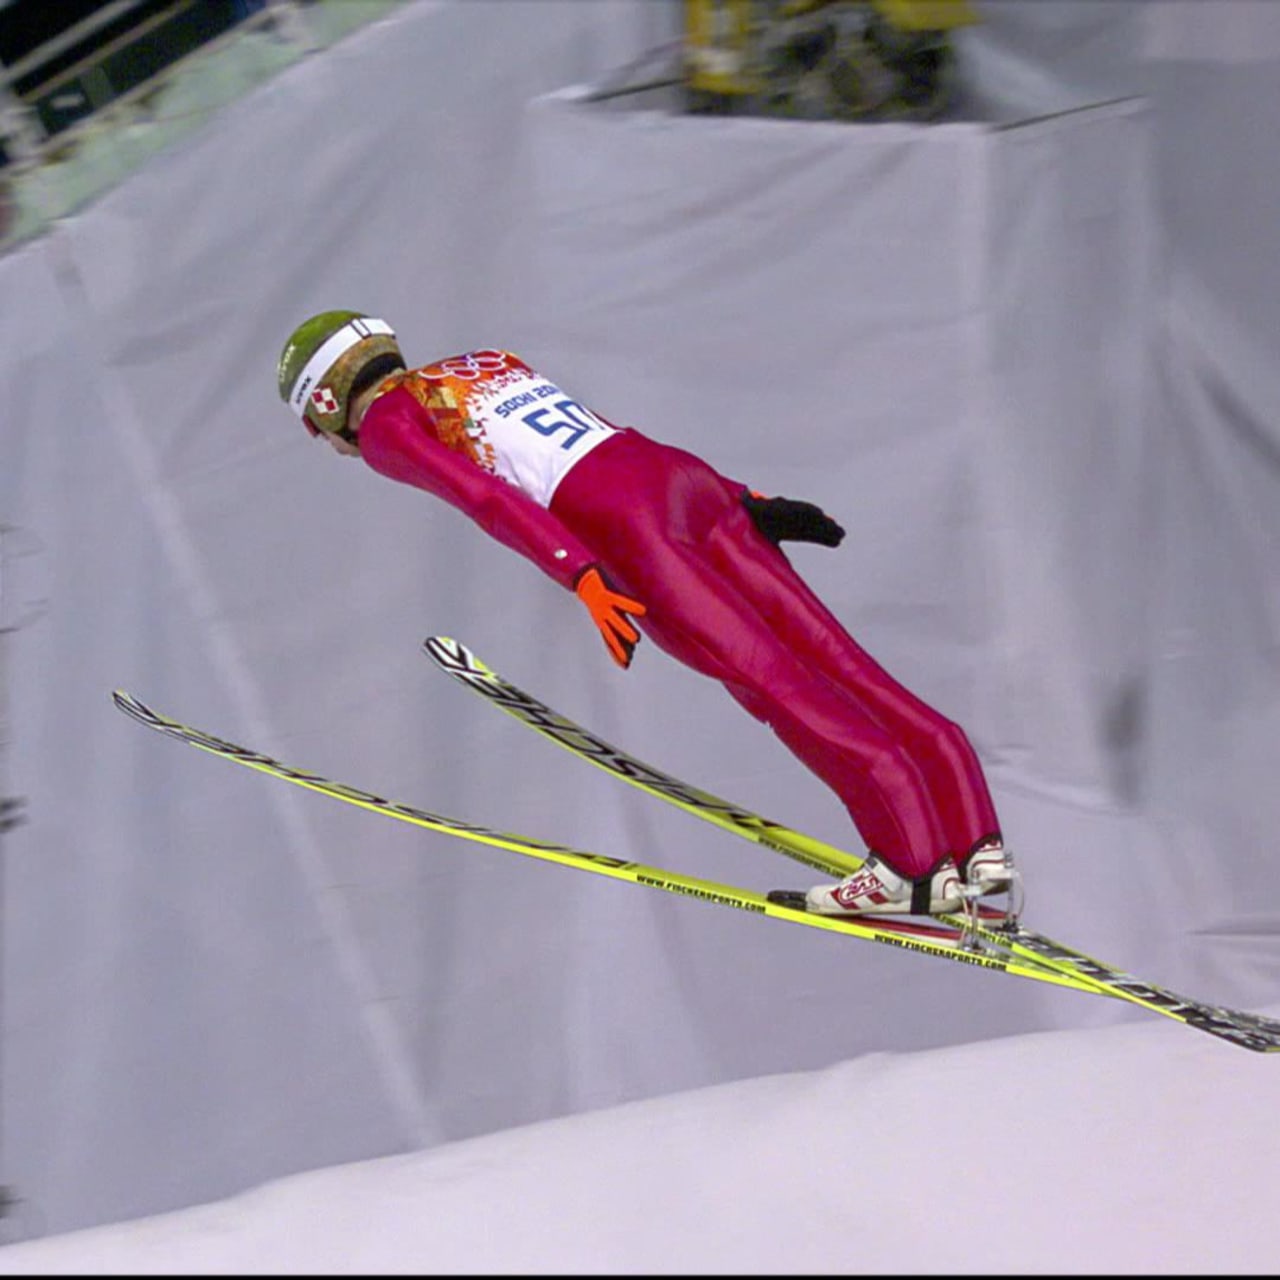 Best Of Mens Normal Hill and Large Hill Ski Jumping Sochi 2014